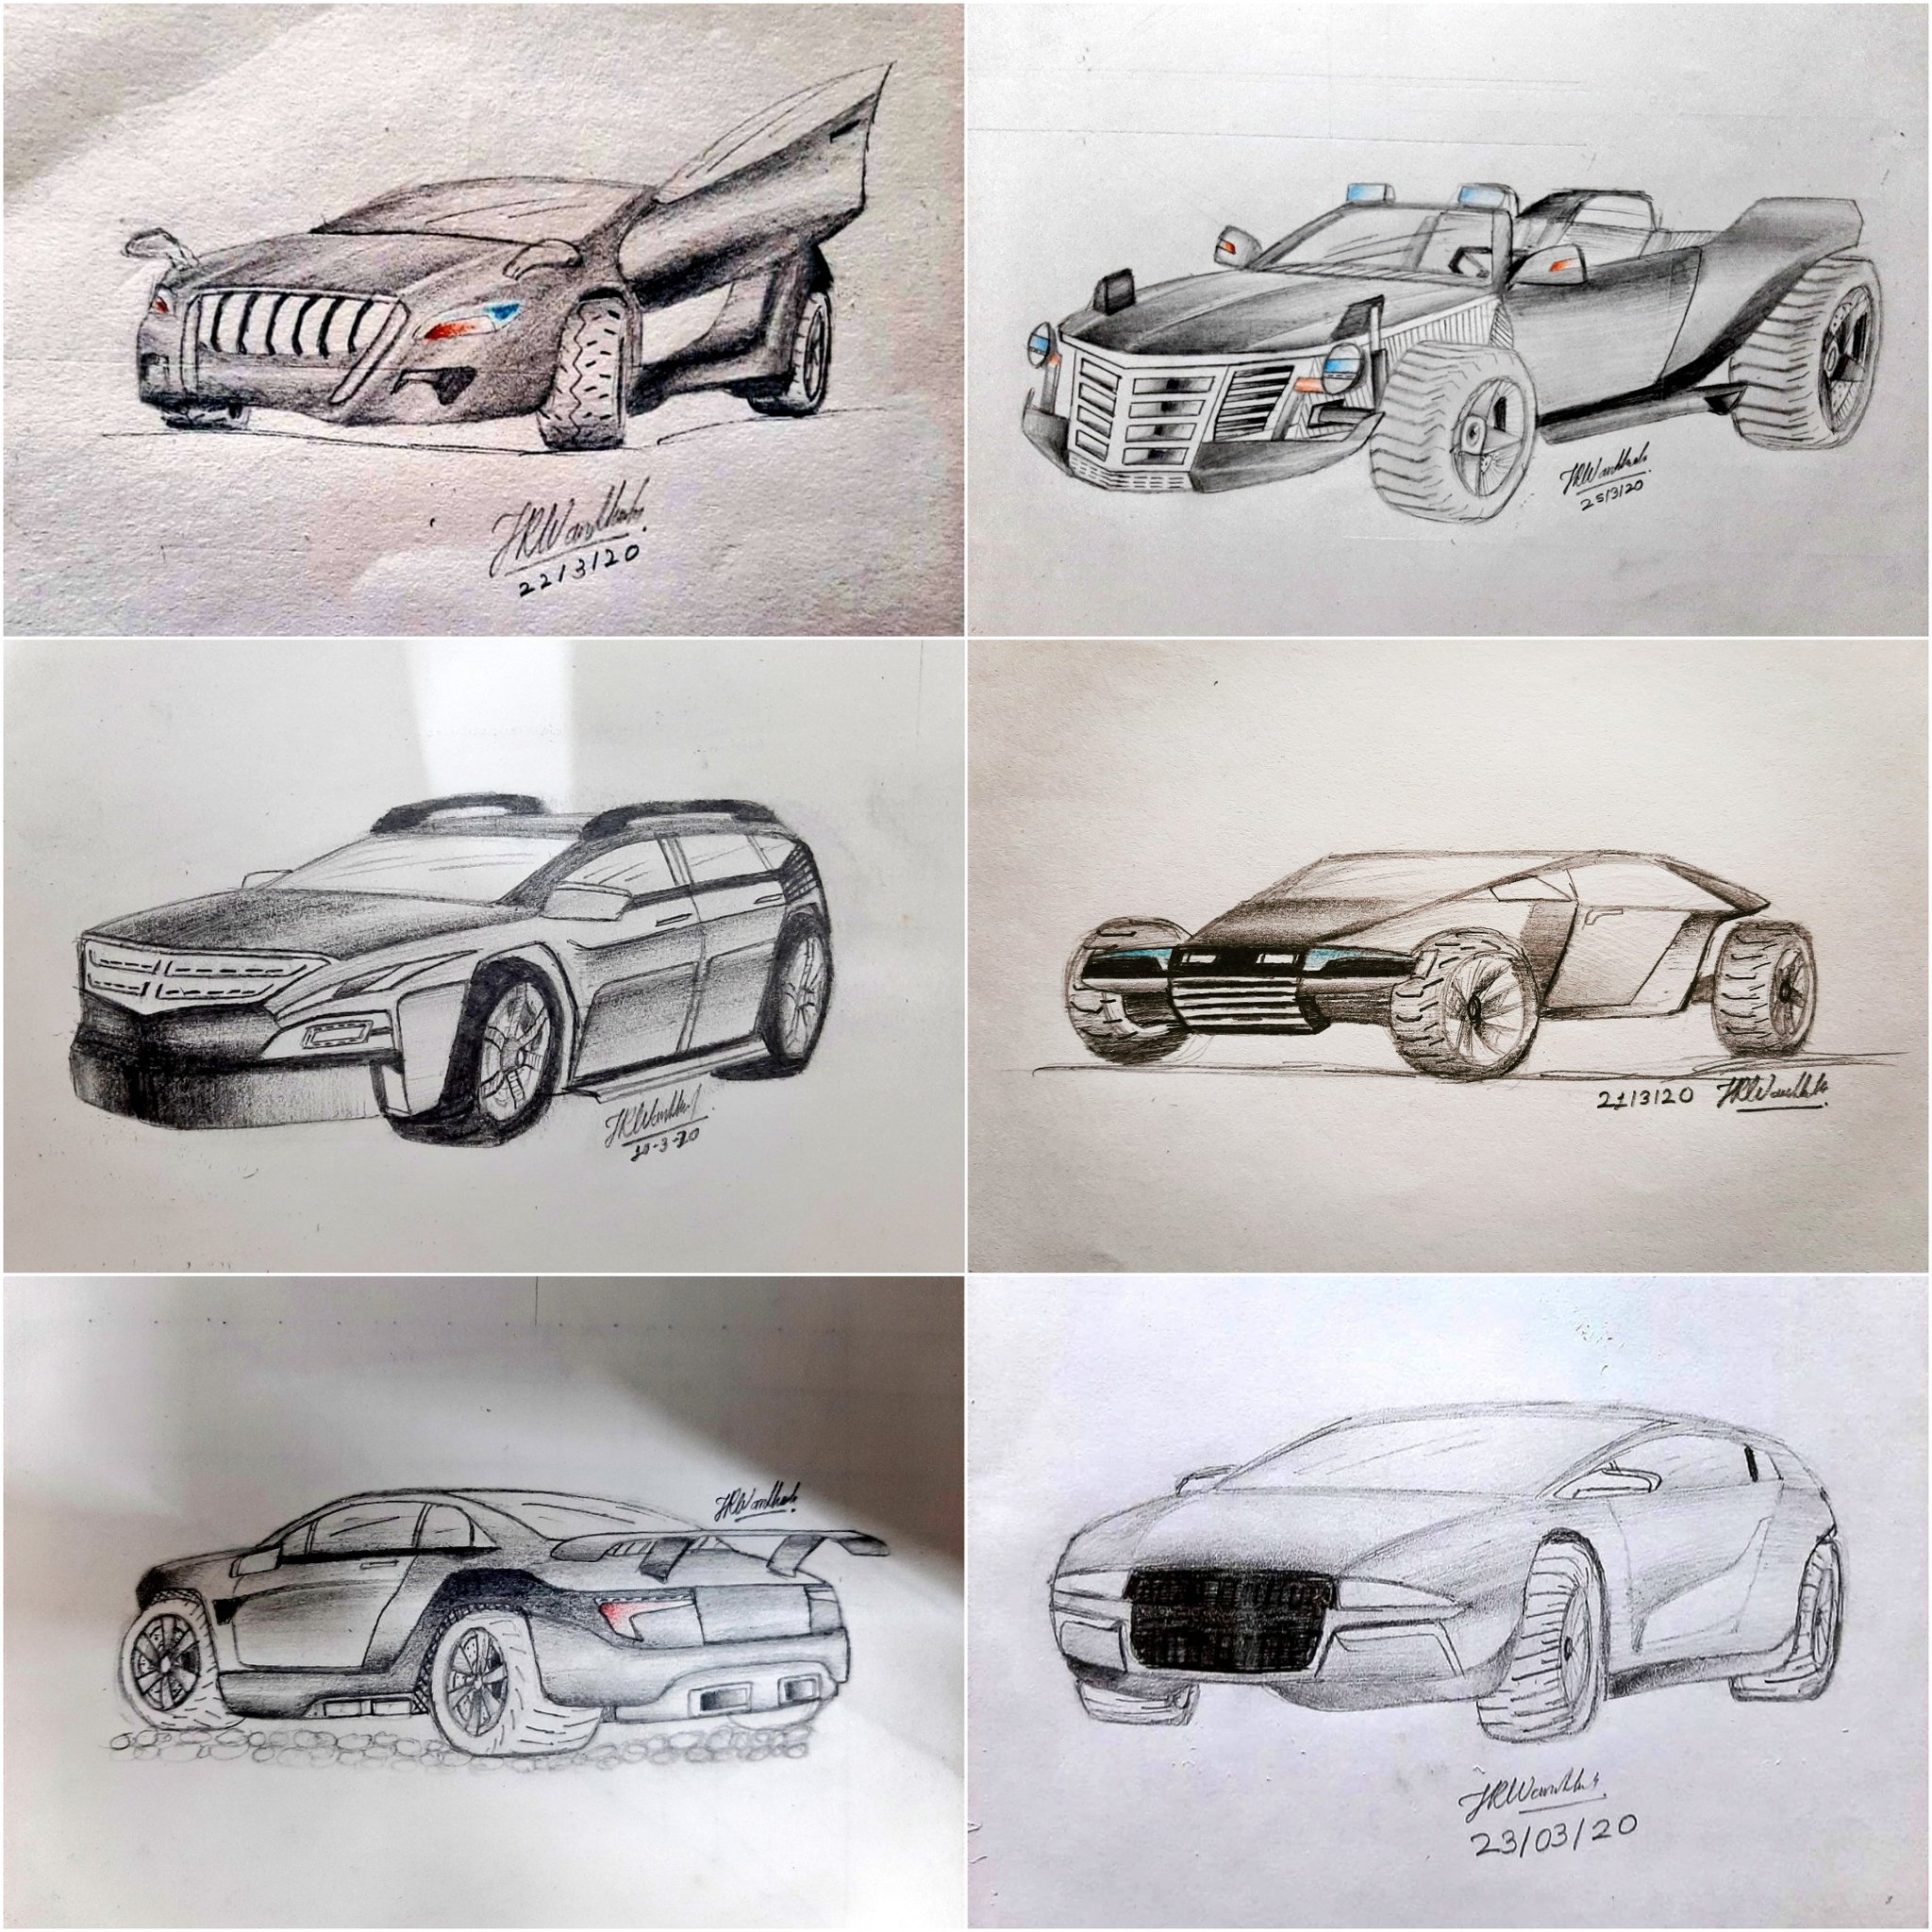 Automotive Design Process: From Concept Ideas to Production - APW